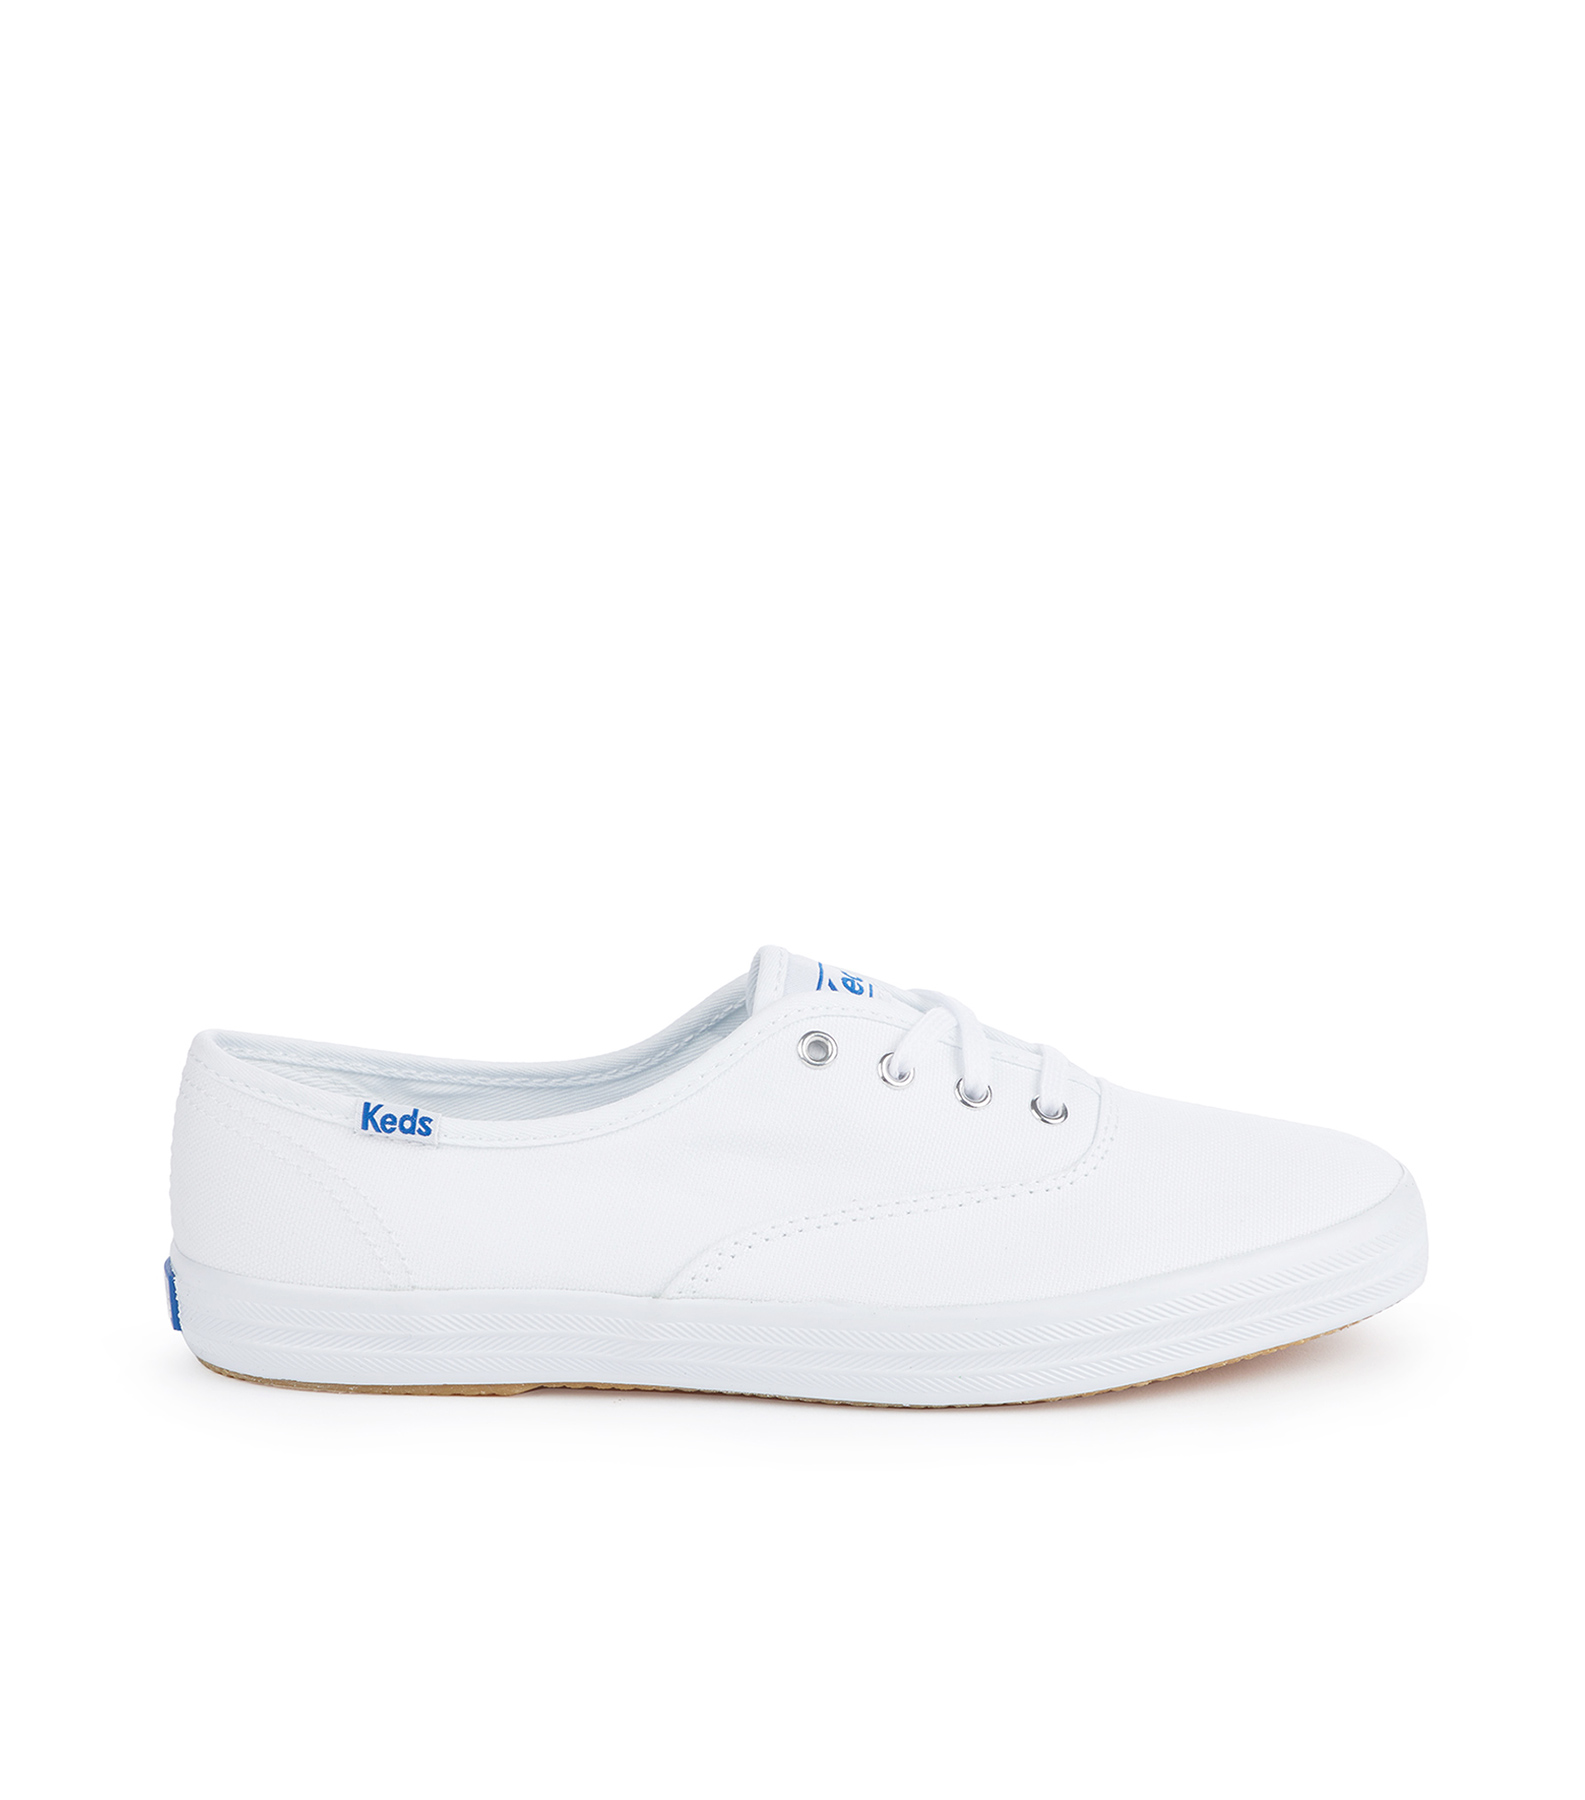 Keds Tenis Casuales Mujer